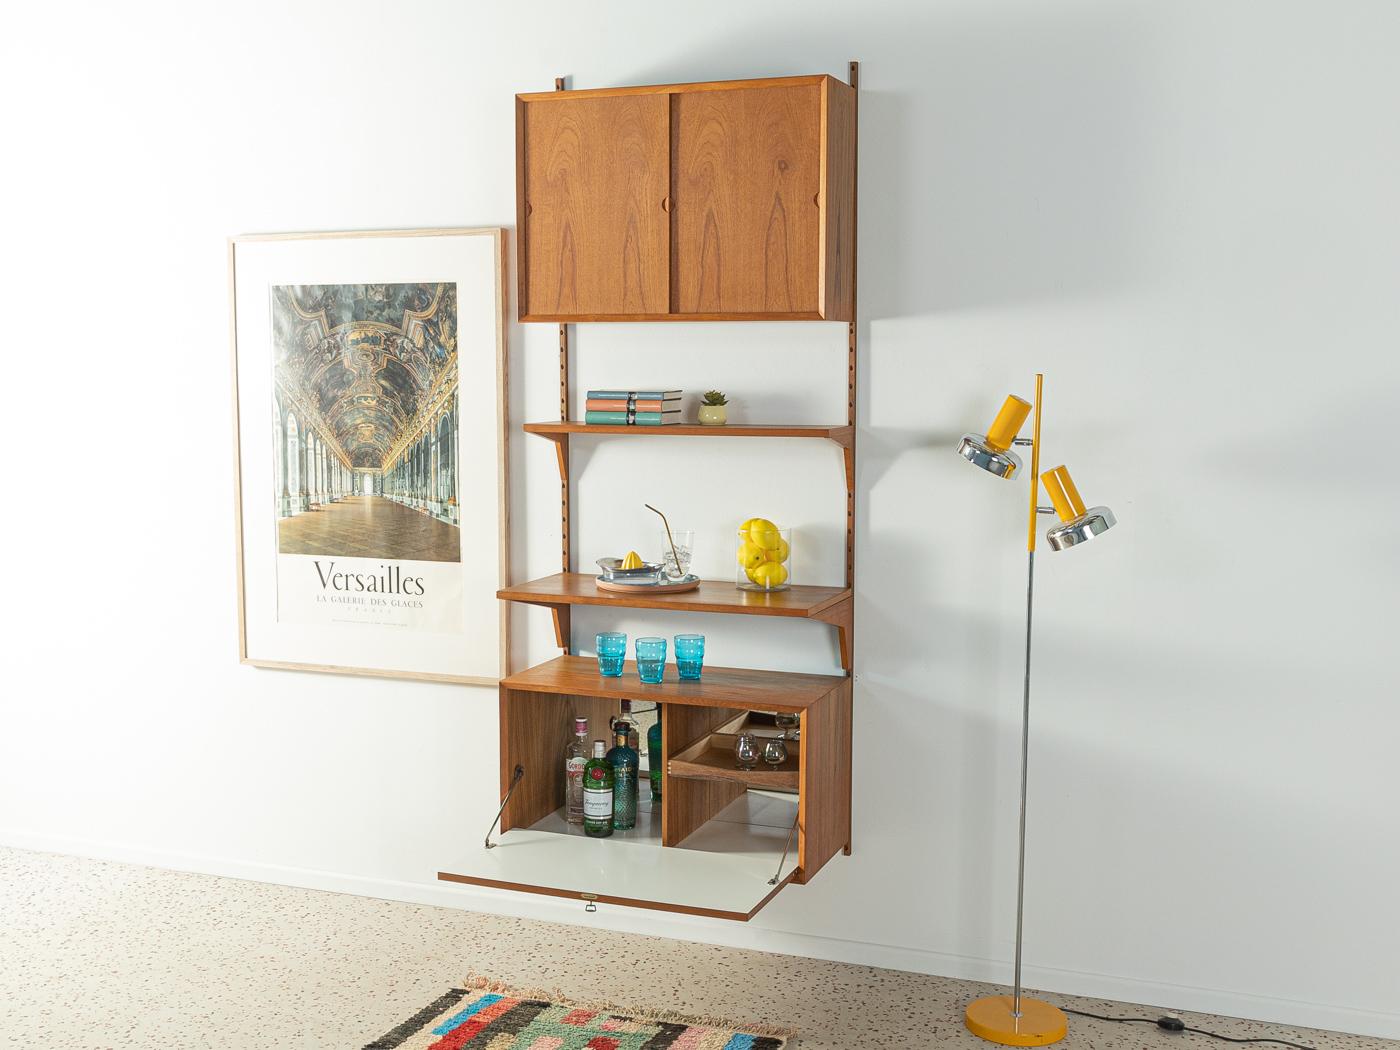 Classic shelving system from the 1960s, the high-quality containers and shelves are veneered in teak. The system consists of two shelves, a container with sliding doors, a bar container with folding door and two wooden ladders.

Quality